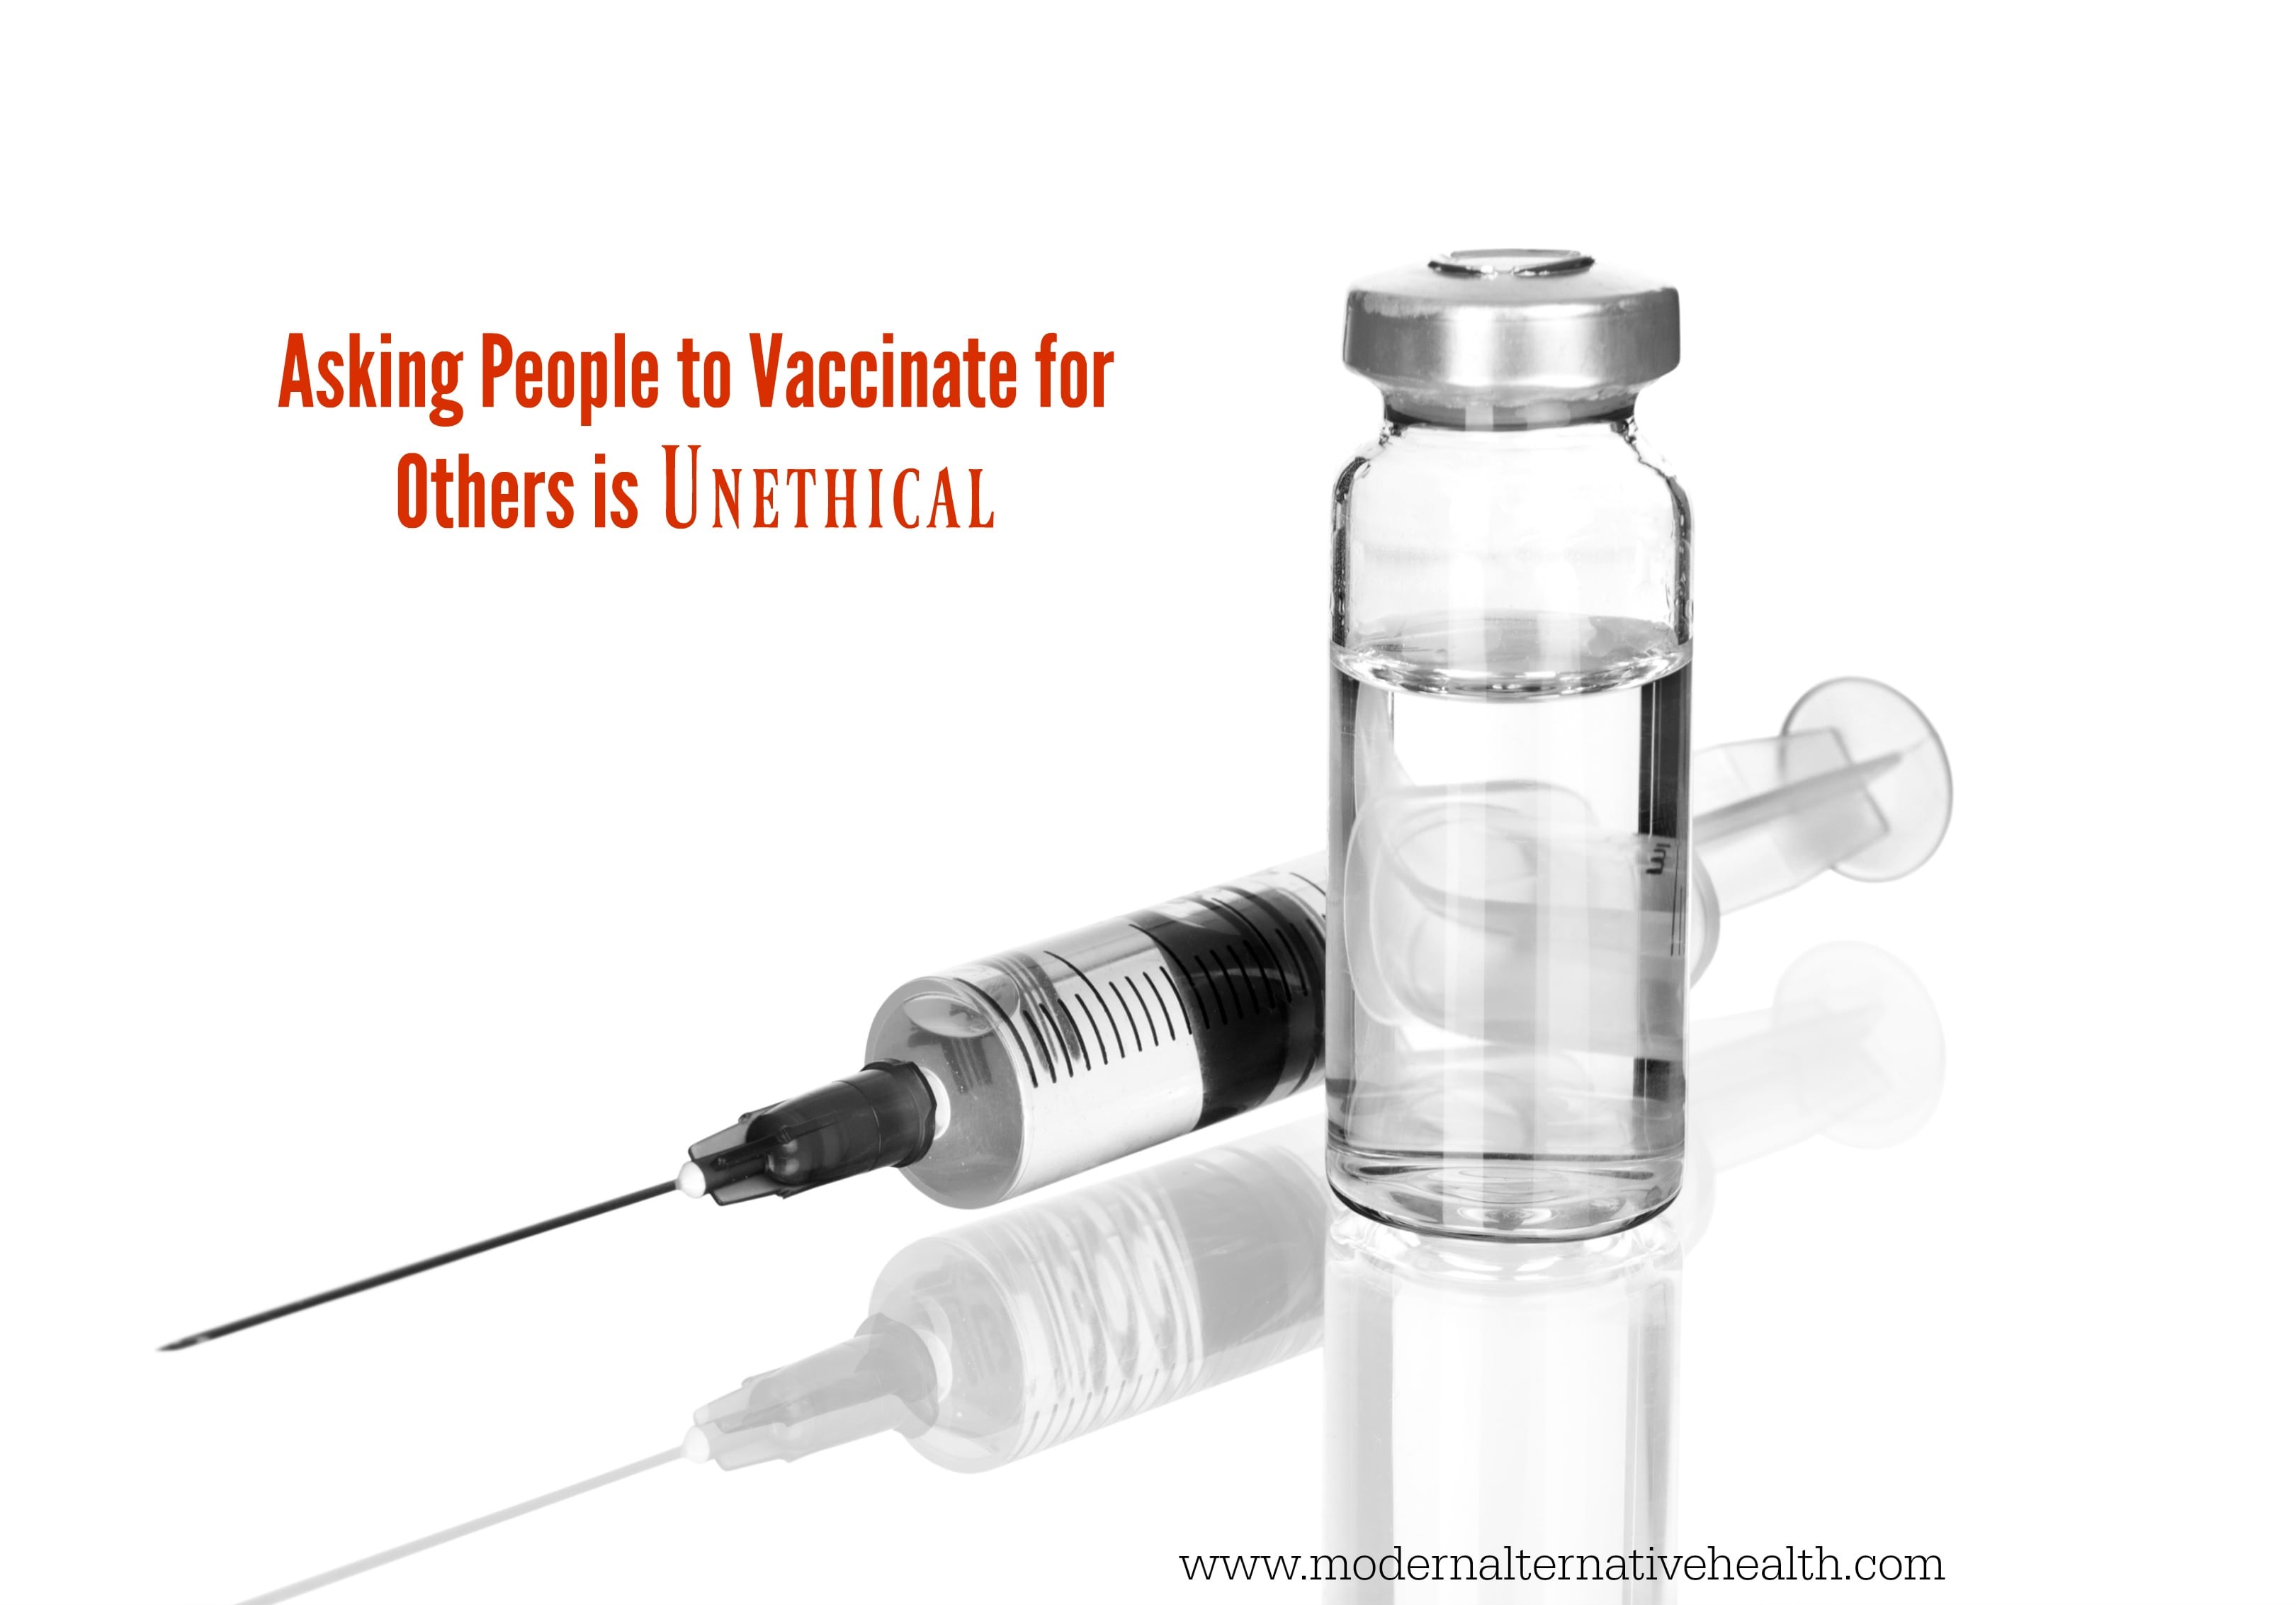 Asking People to Vaccinate for Others is Unethical